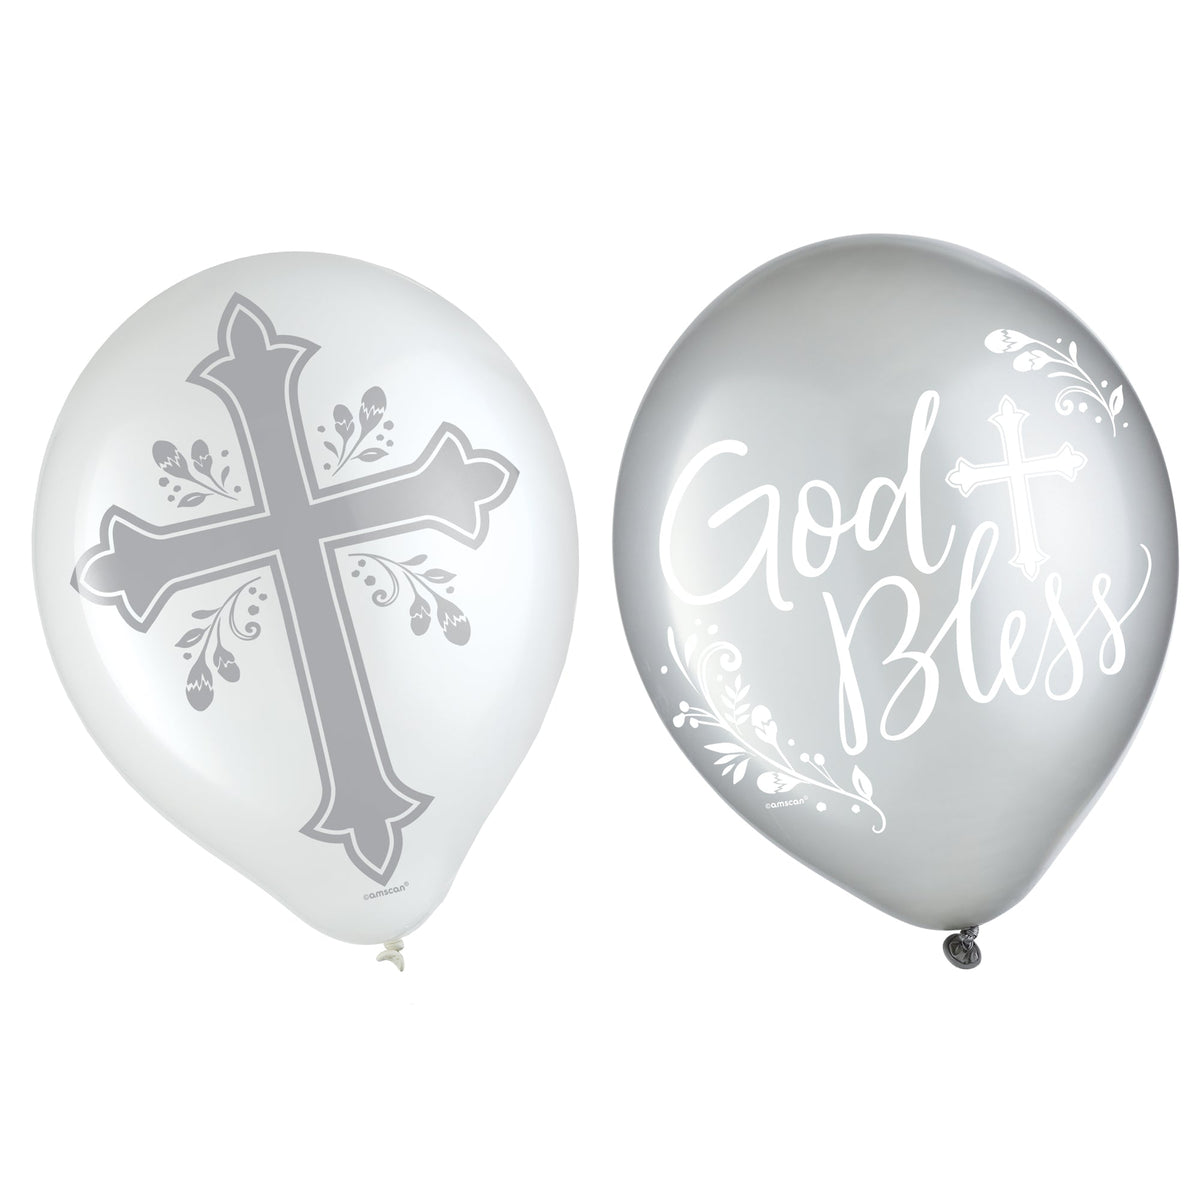 Holy Day Print 12" Latex Balloons 15 count Helium Quality